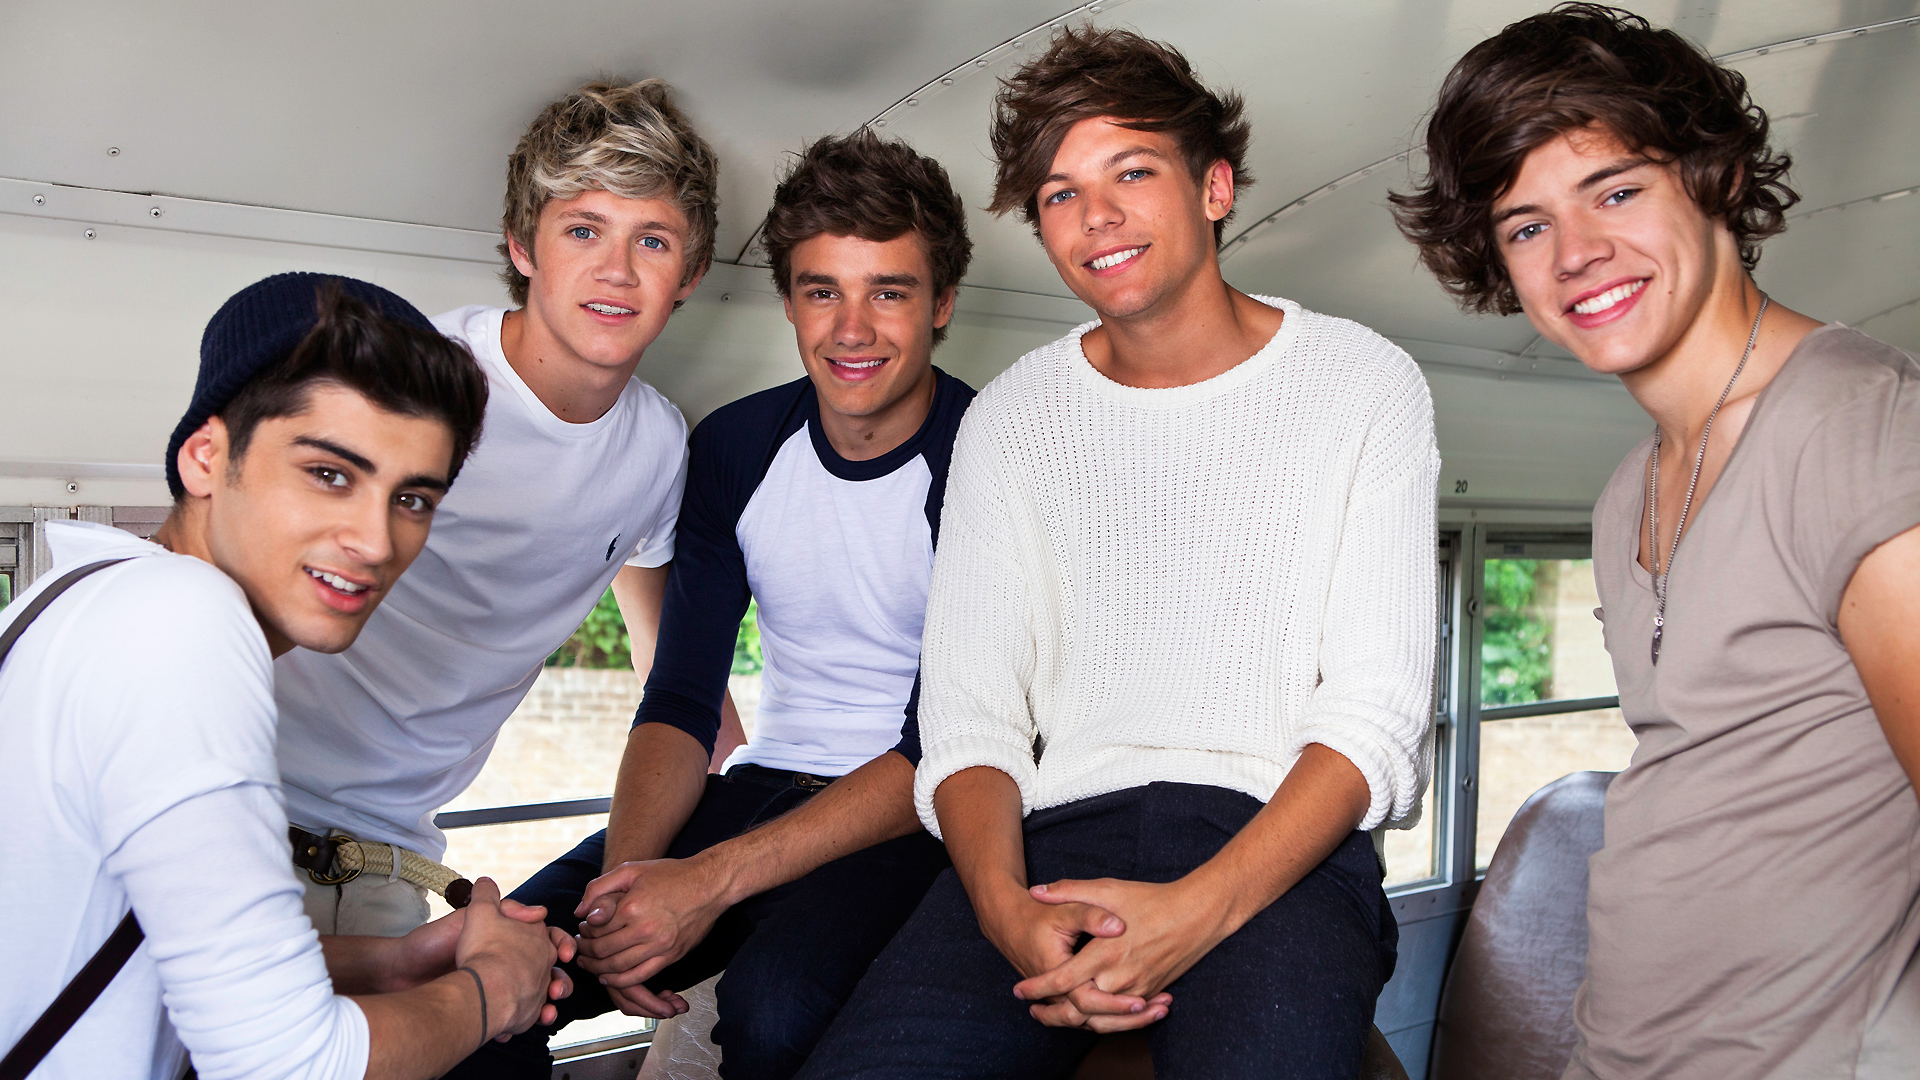 Music One Direction 1920x1080